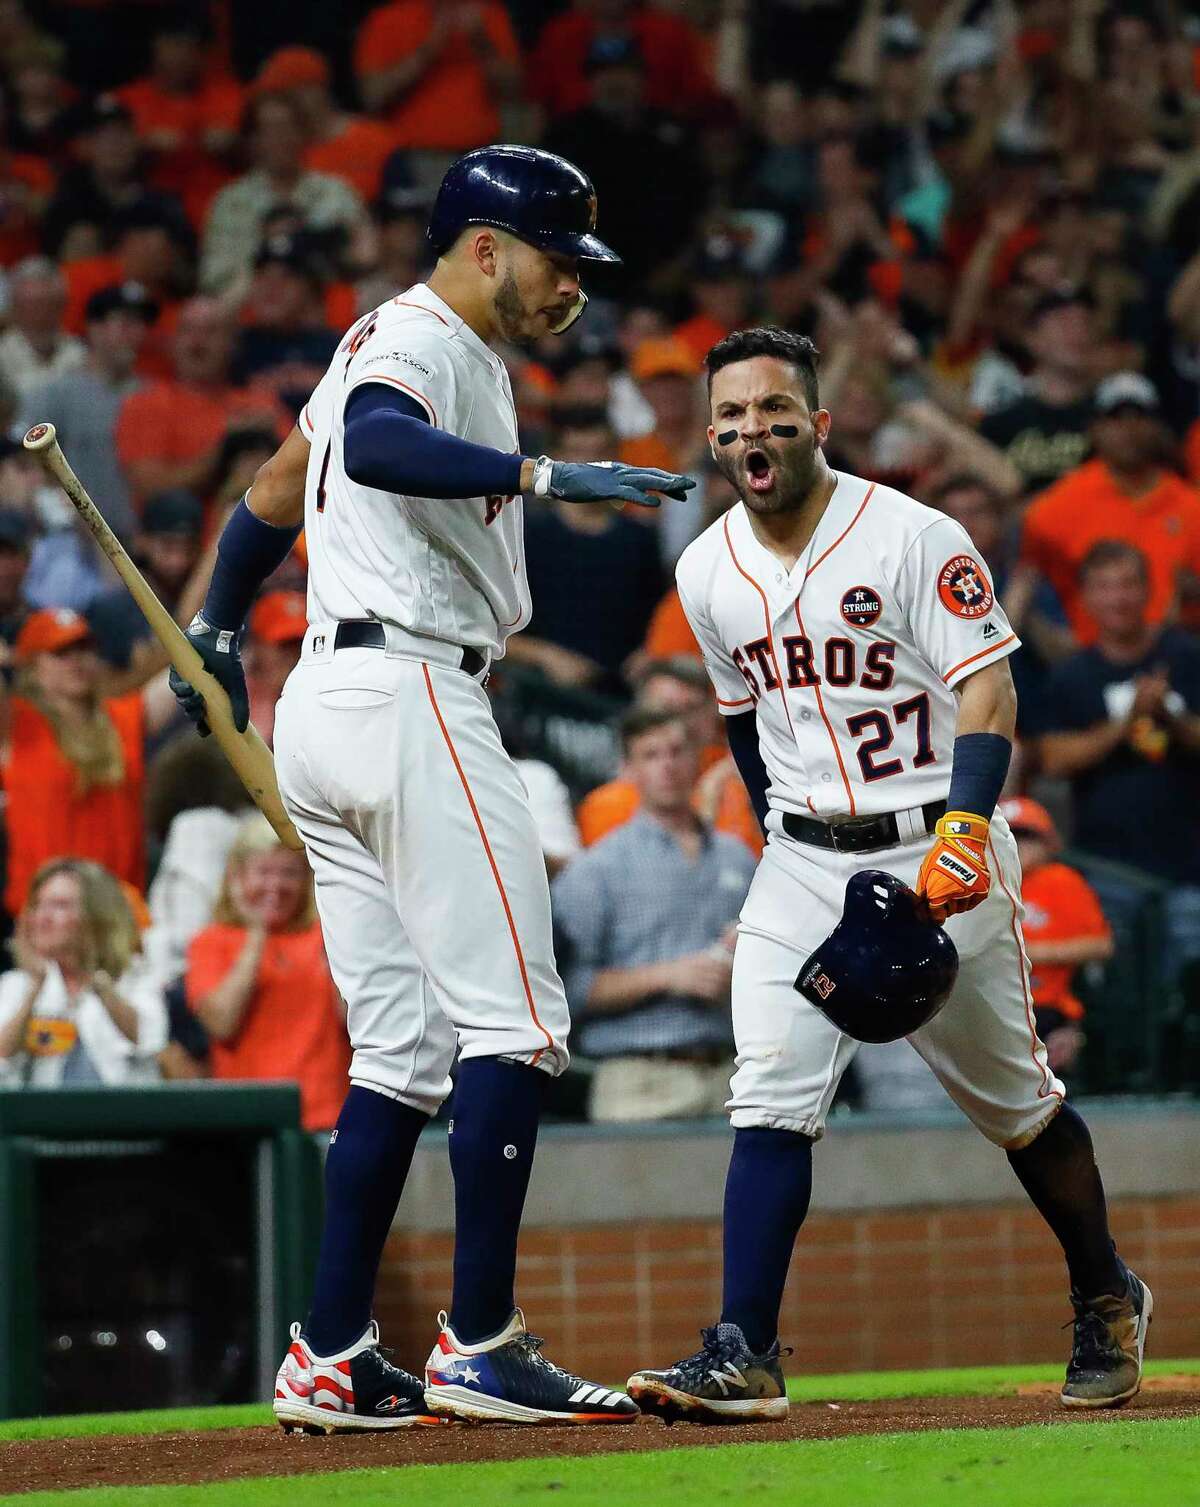 Astros second baseman Jose Altuve, right, and shortstop Carlos Correa celebrate Altuve's solo home run in the fifth inning of Saturday night's ALCS-clinching win over the Yankees at Minute Maid Park.